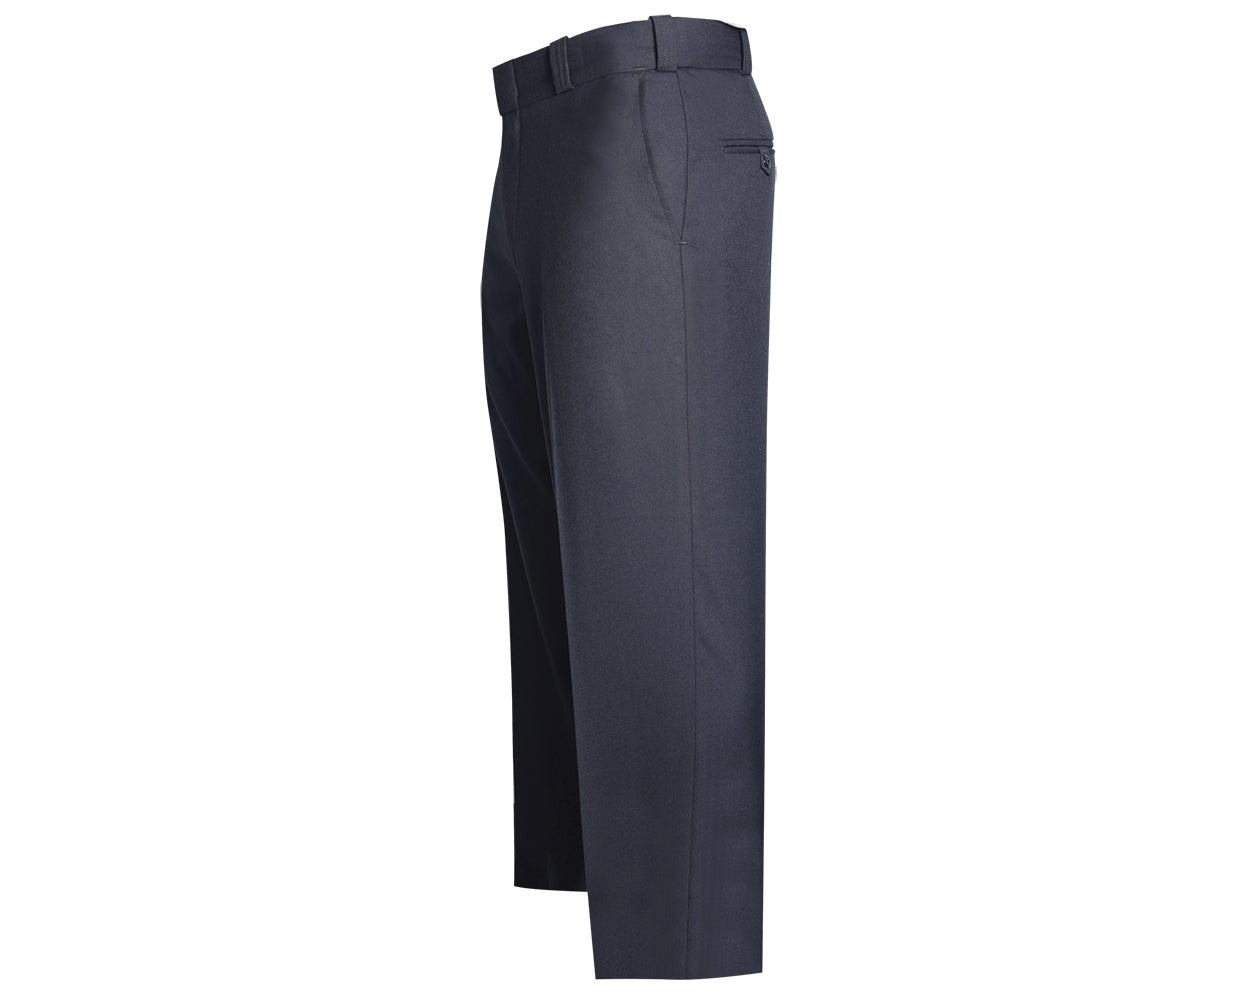 Flying Cross Justice 75% Poly/25% Wool Women's Uniform Pants with Freedom Flex Waistband - Newest Products